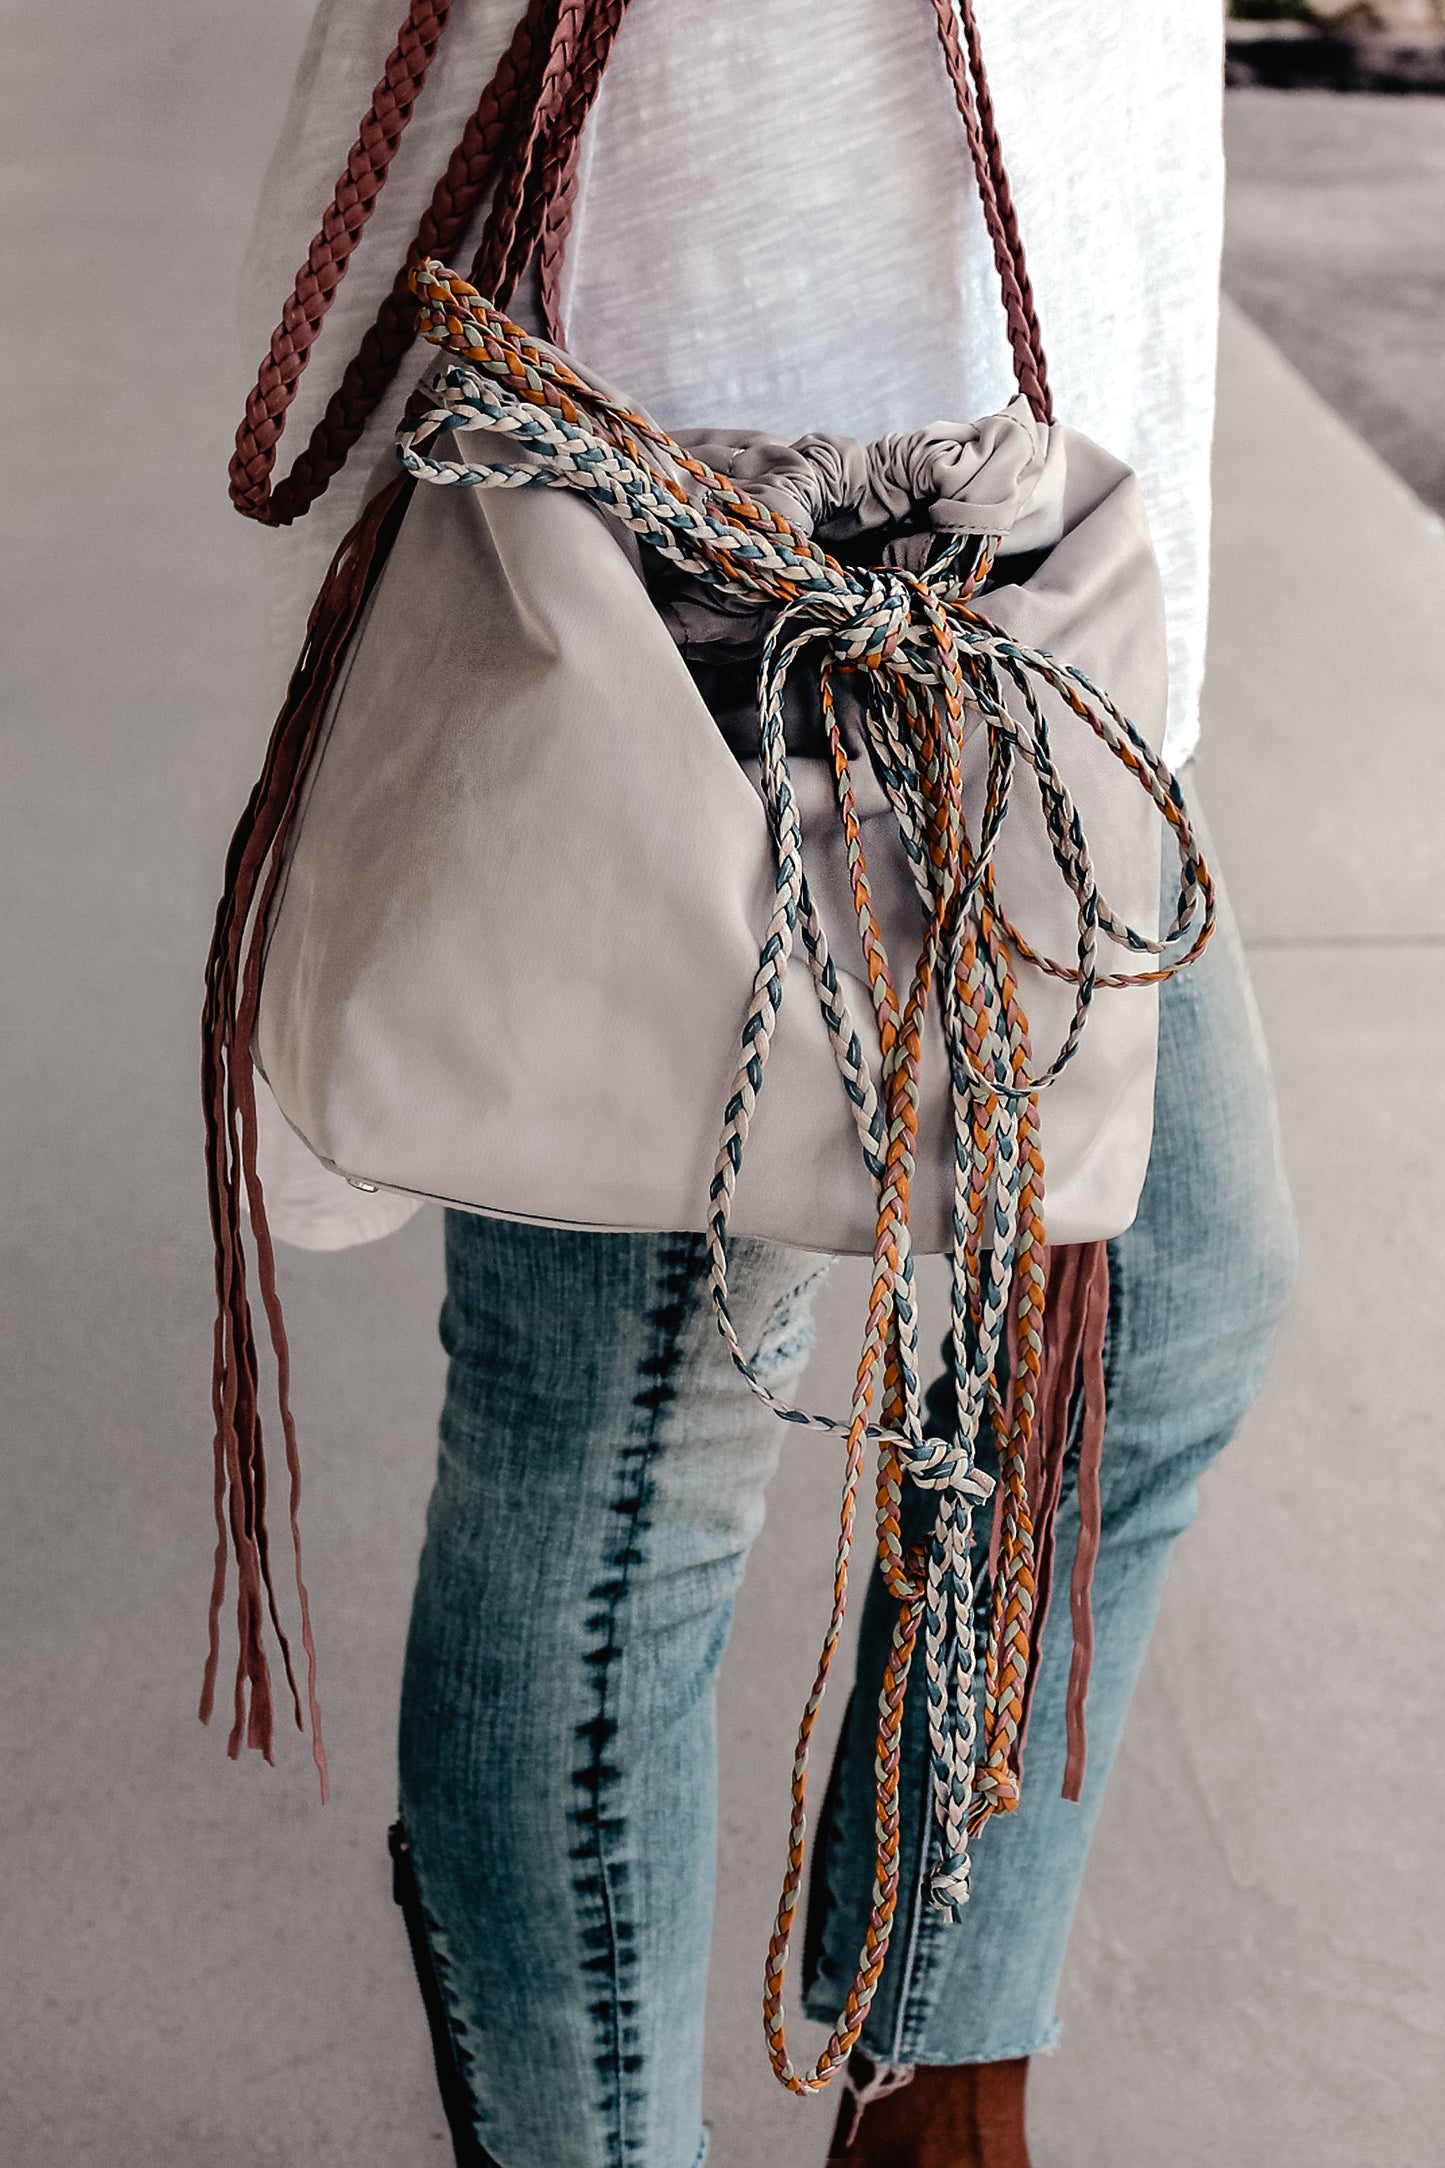 person wearing sporty gray nylon cinch bag with colorful braided leather straps.